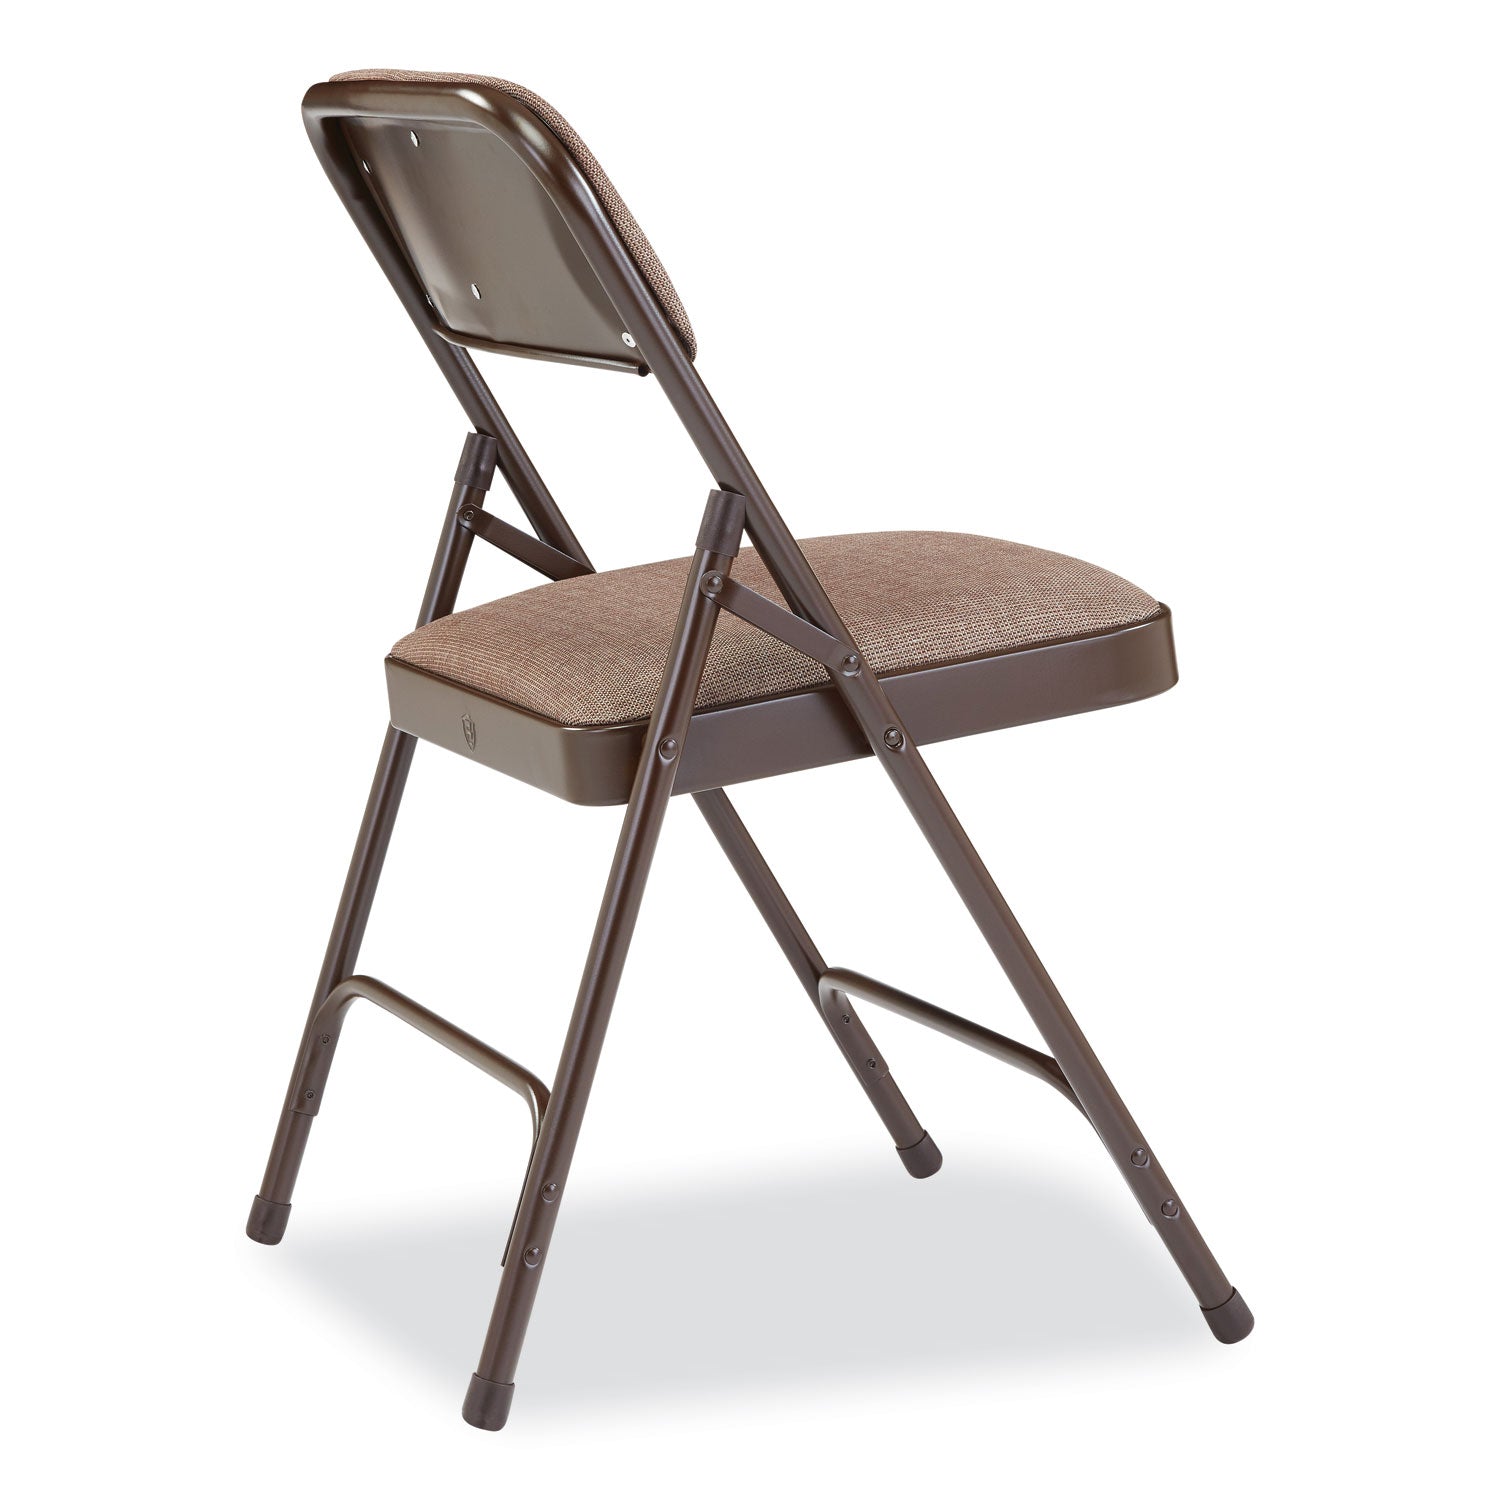 2200-series-fabric-dual-hinge-premium-folding-chair-supports-500-lb-walnut-seat-back-brown-base4-ctships-in-1-3-bus-days_nps2207 - 4